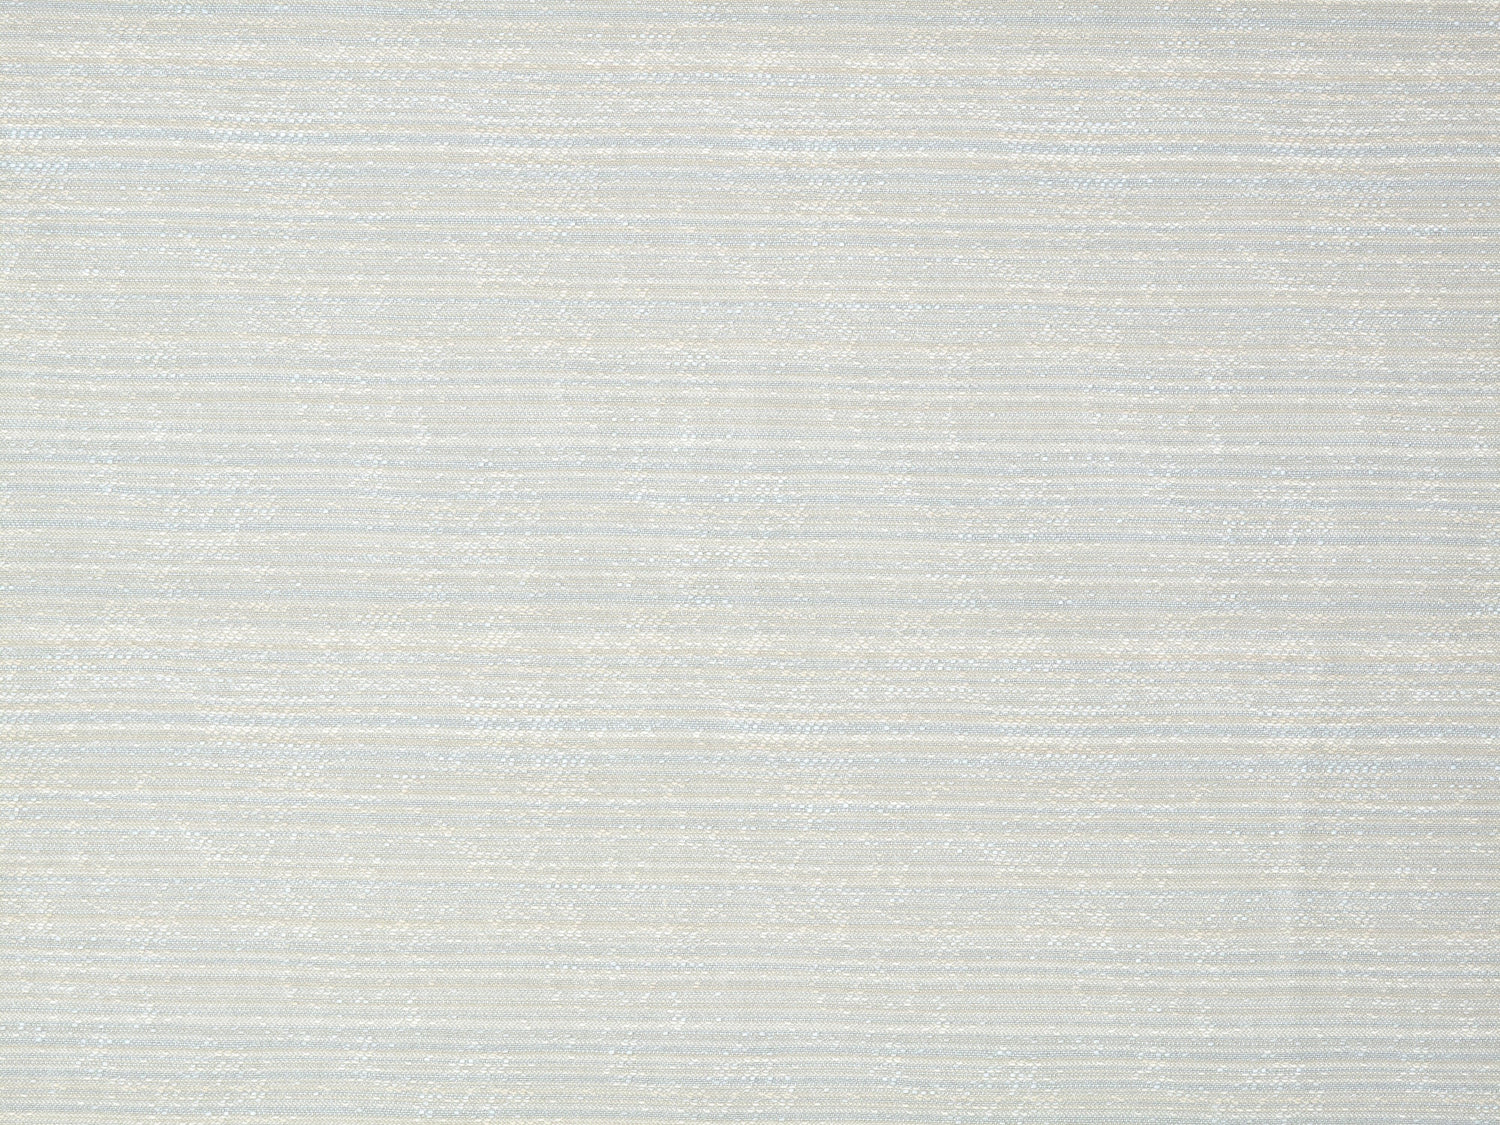 Avalonia fabric in sky color - pattern number WC 0002U193 - by Scalamandre in the Old World Weavers collection